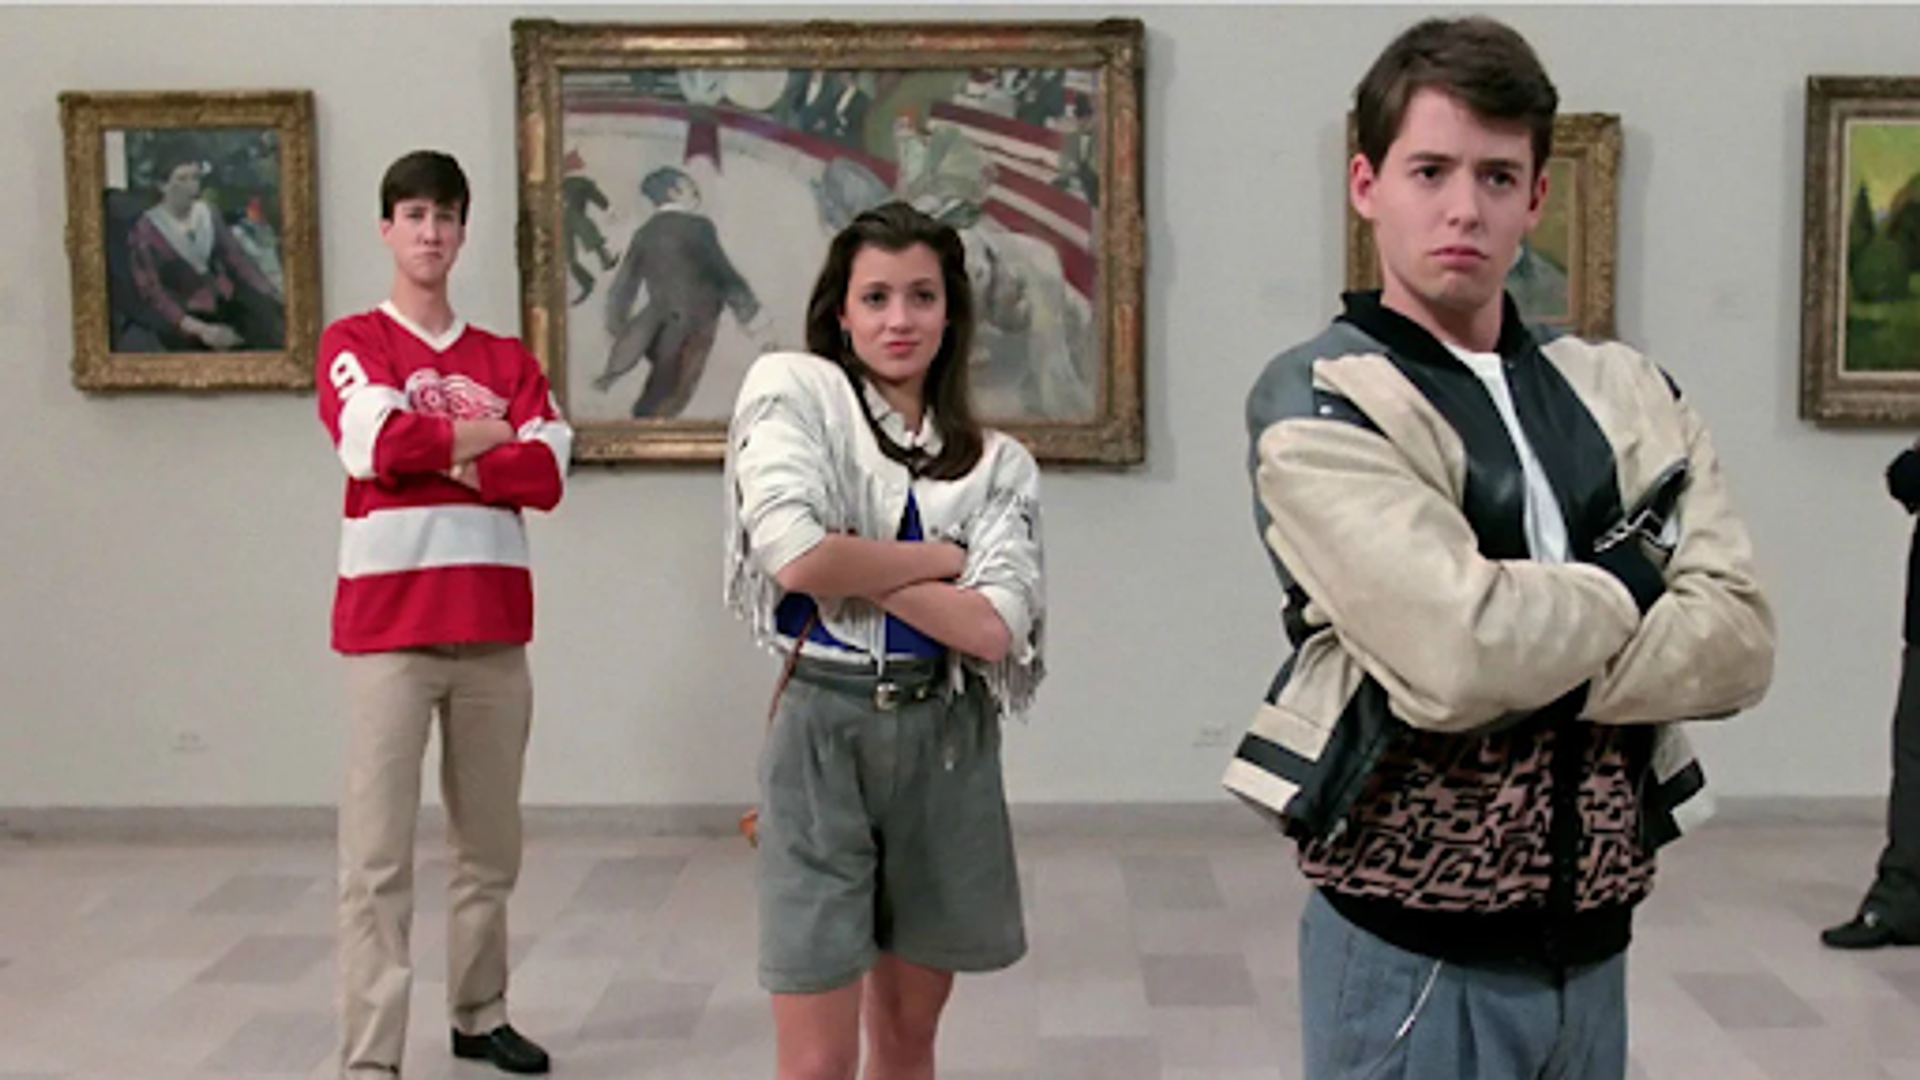 Photograph from the film Ferris Bueller’s Day Off. Three students with their arms folded, staring at art.